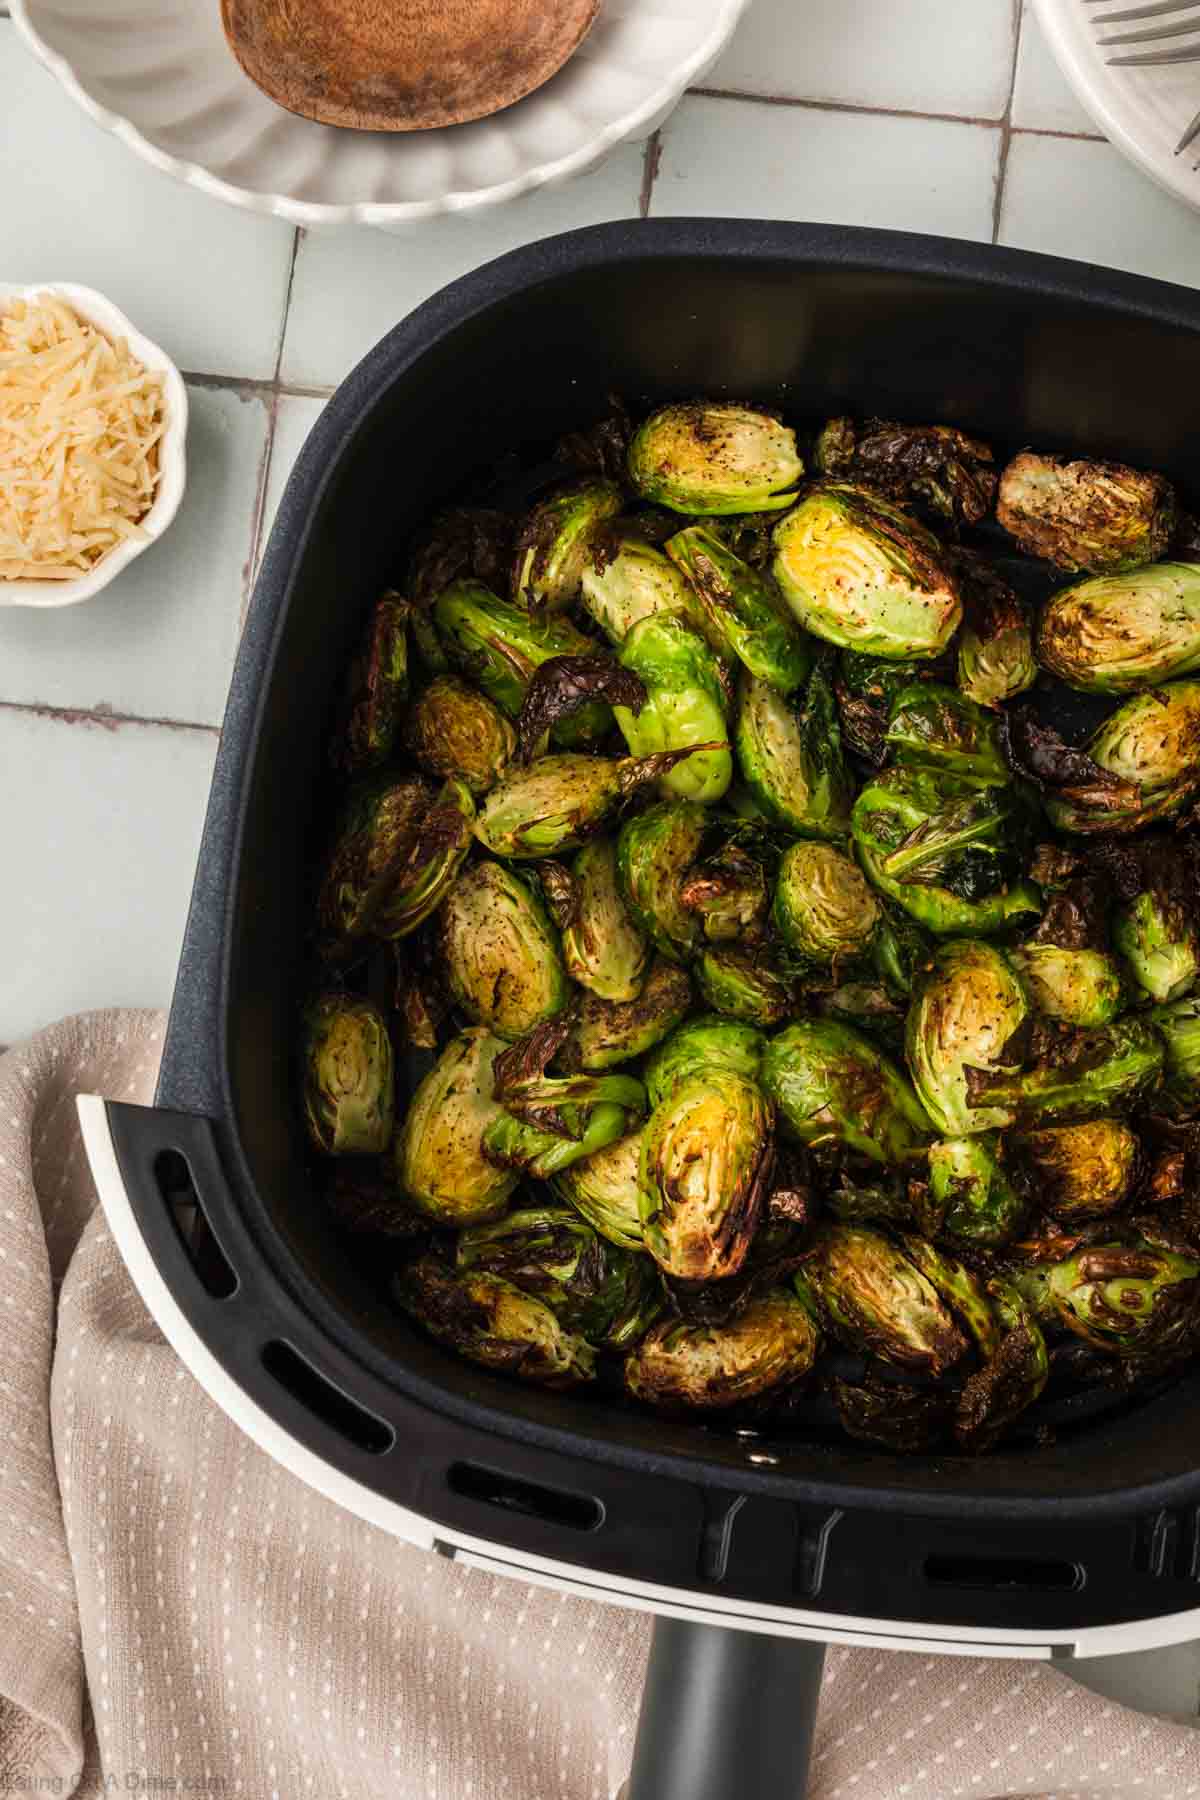 Close-up of roasted Brussels sprouts in an air fryer basket, crispy and golden brown. Surrounding the air fryer are small bowls and a fabric napkin, creating a homey kitchen atmosphere, perfect for trying out your new favorite air fryer Brussels sprouts recipe.